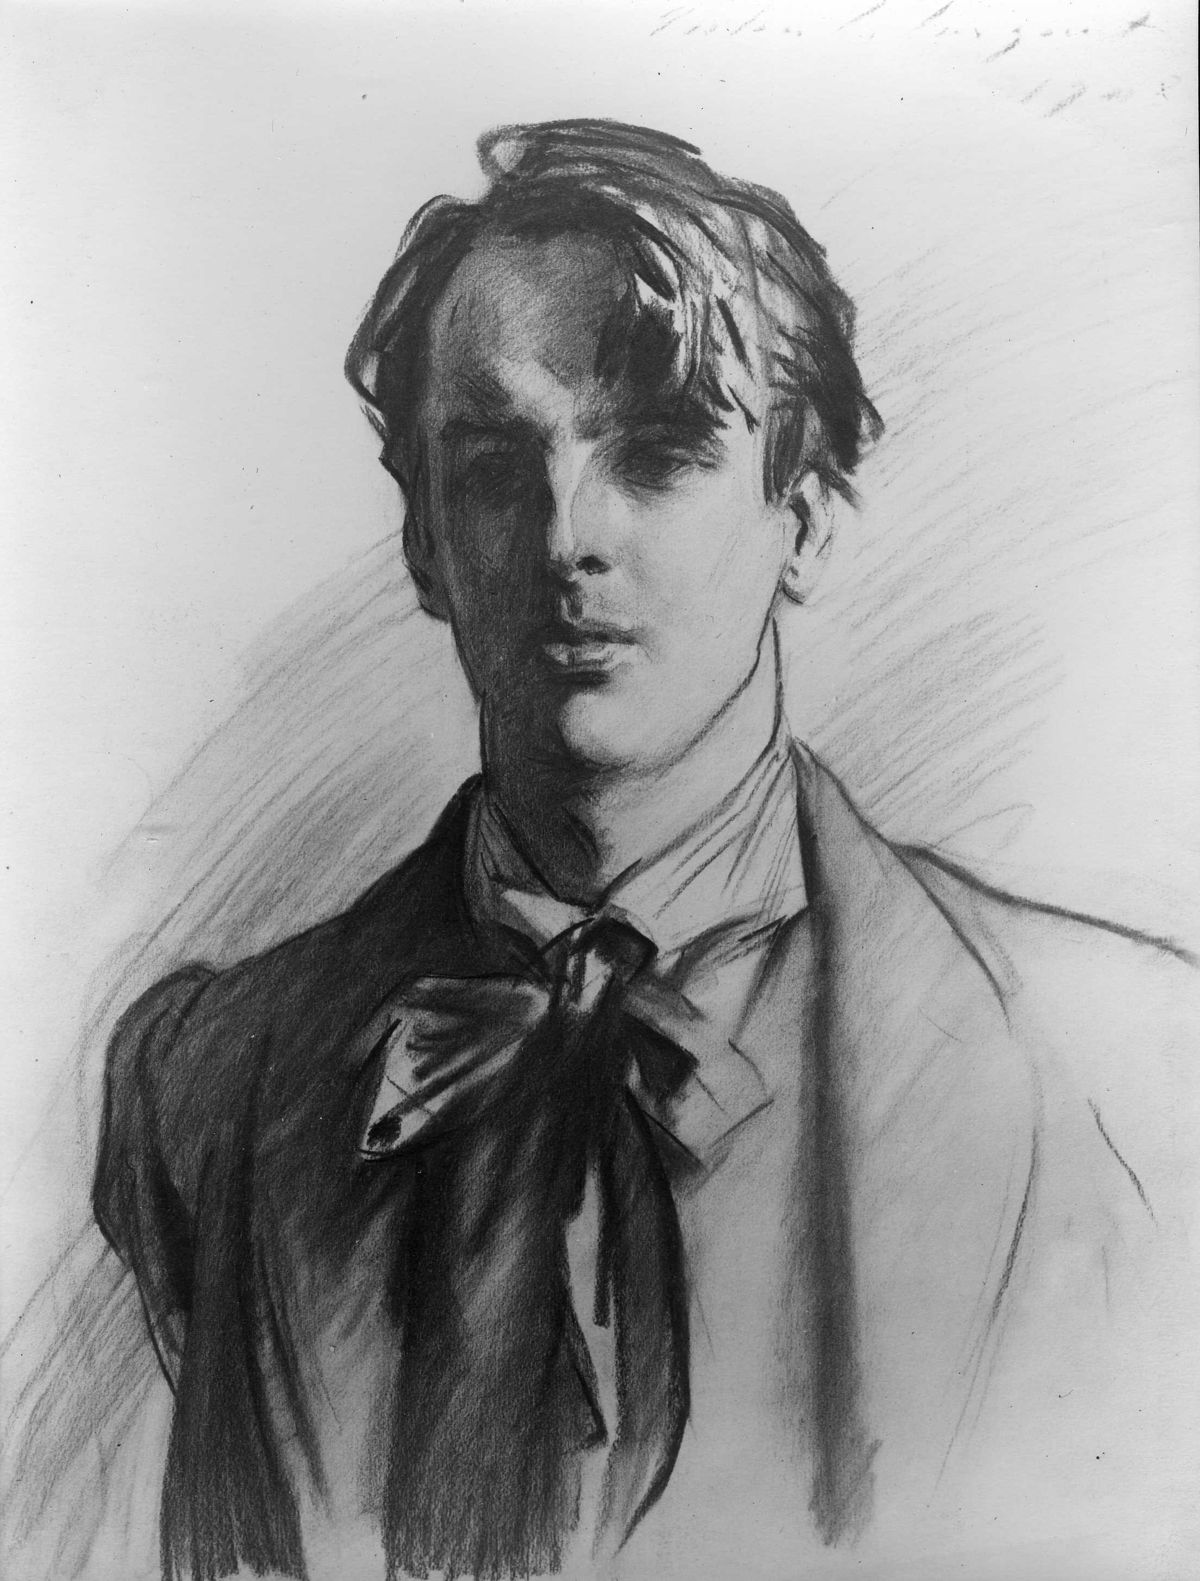 William Butler Yeats by John Singer Sargent - 1907 - 62.2 × 47 cm private collection